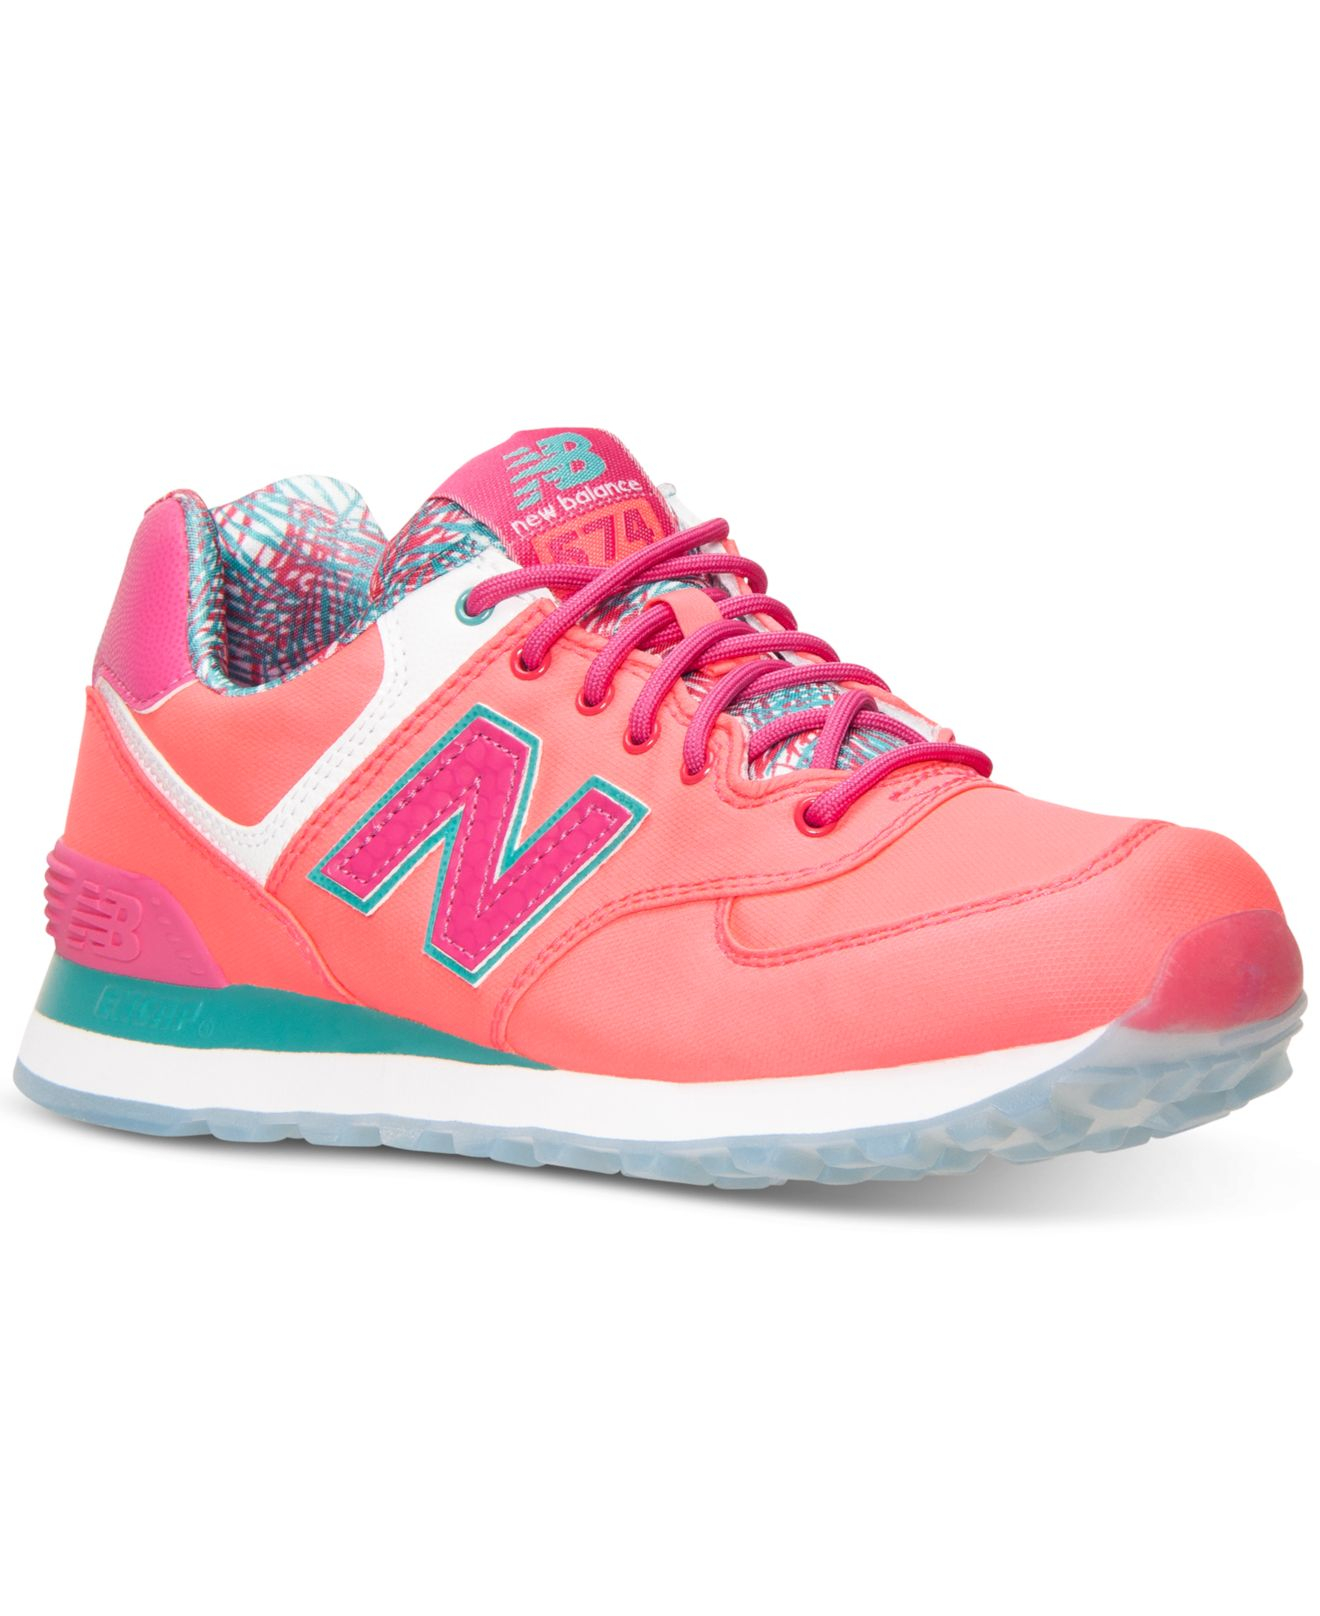 Lyst - New Balance Womens 574 Island Casual Sneakers From Finish Line ...